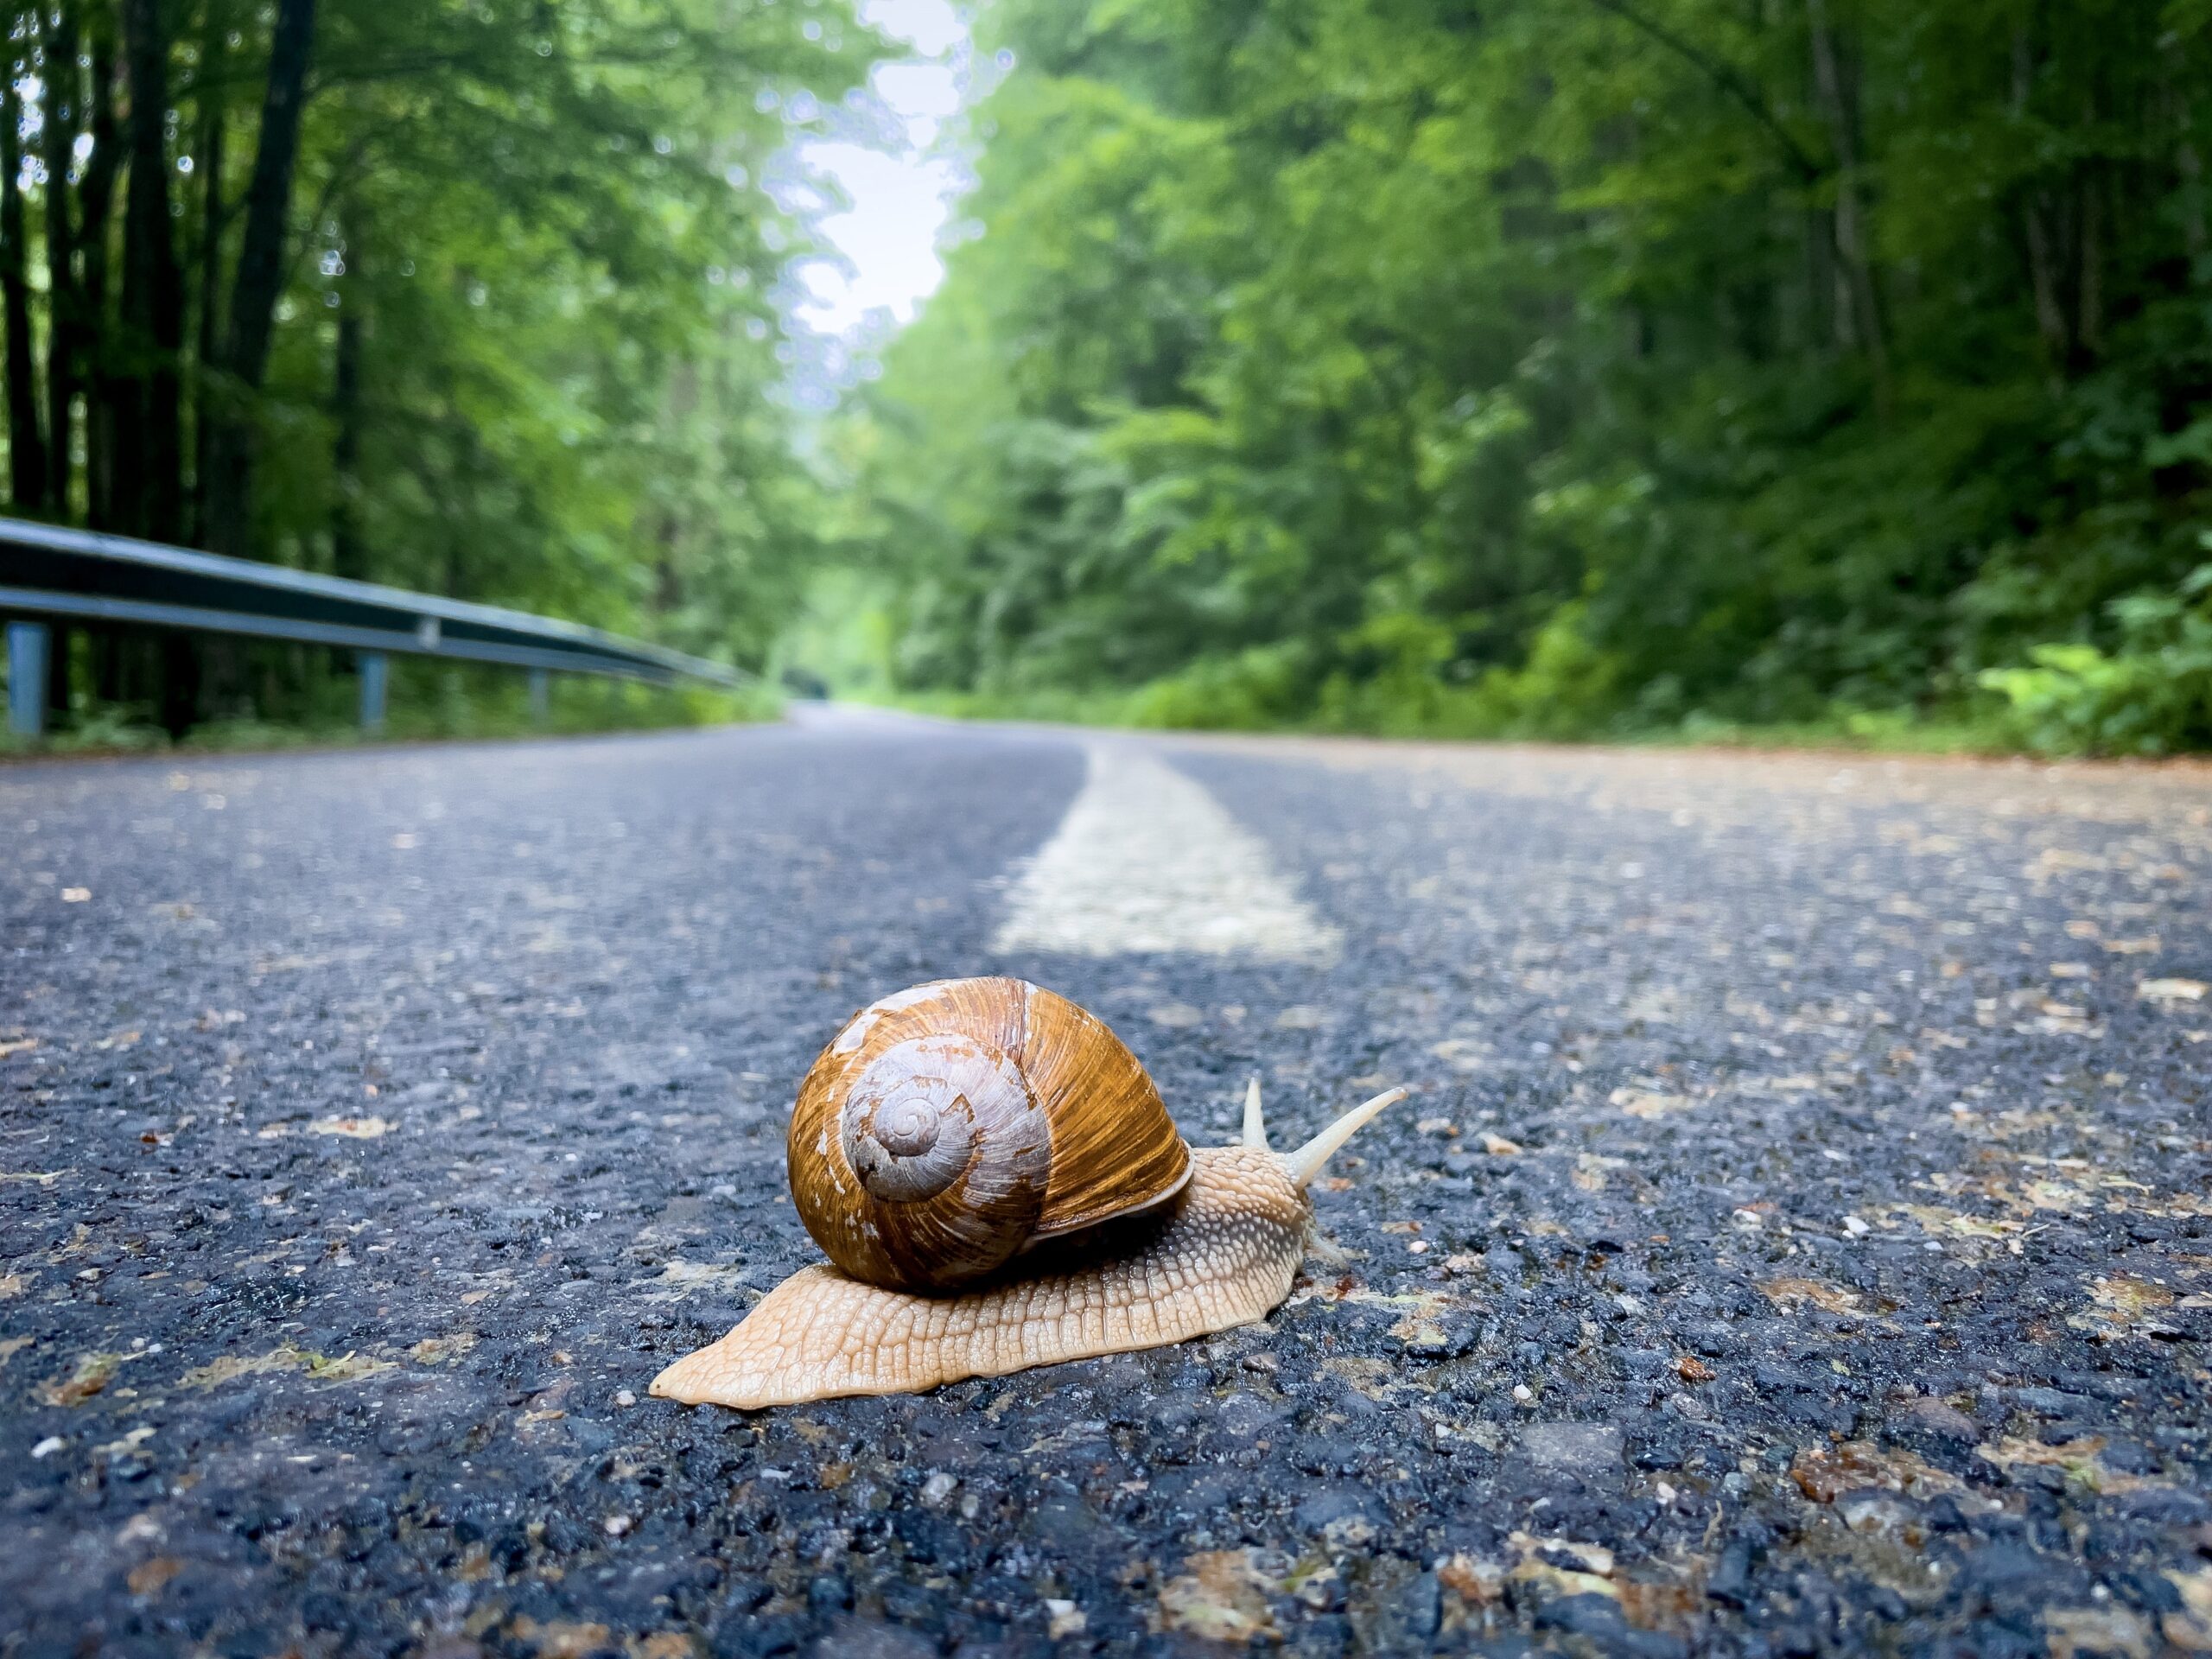 Photo of a snail crossing the middle of a road, with the road stretching out in the distance, with green foliage on both sides.